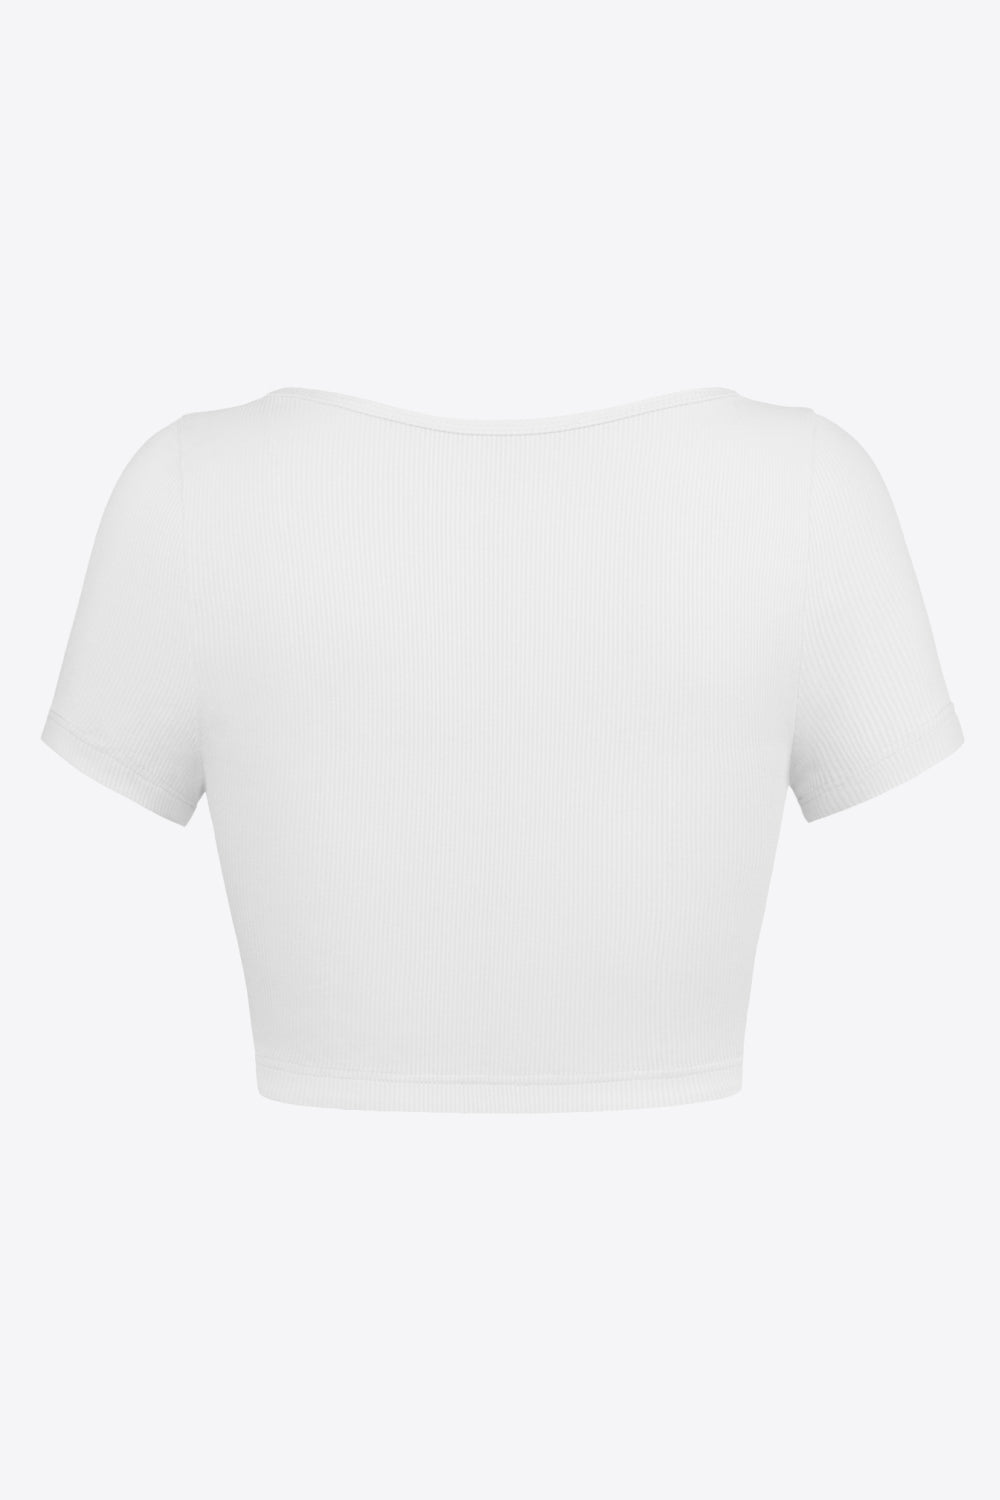 Square Neck Ribbed Crop Top - Guy Christopher 